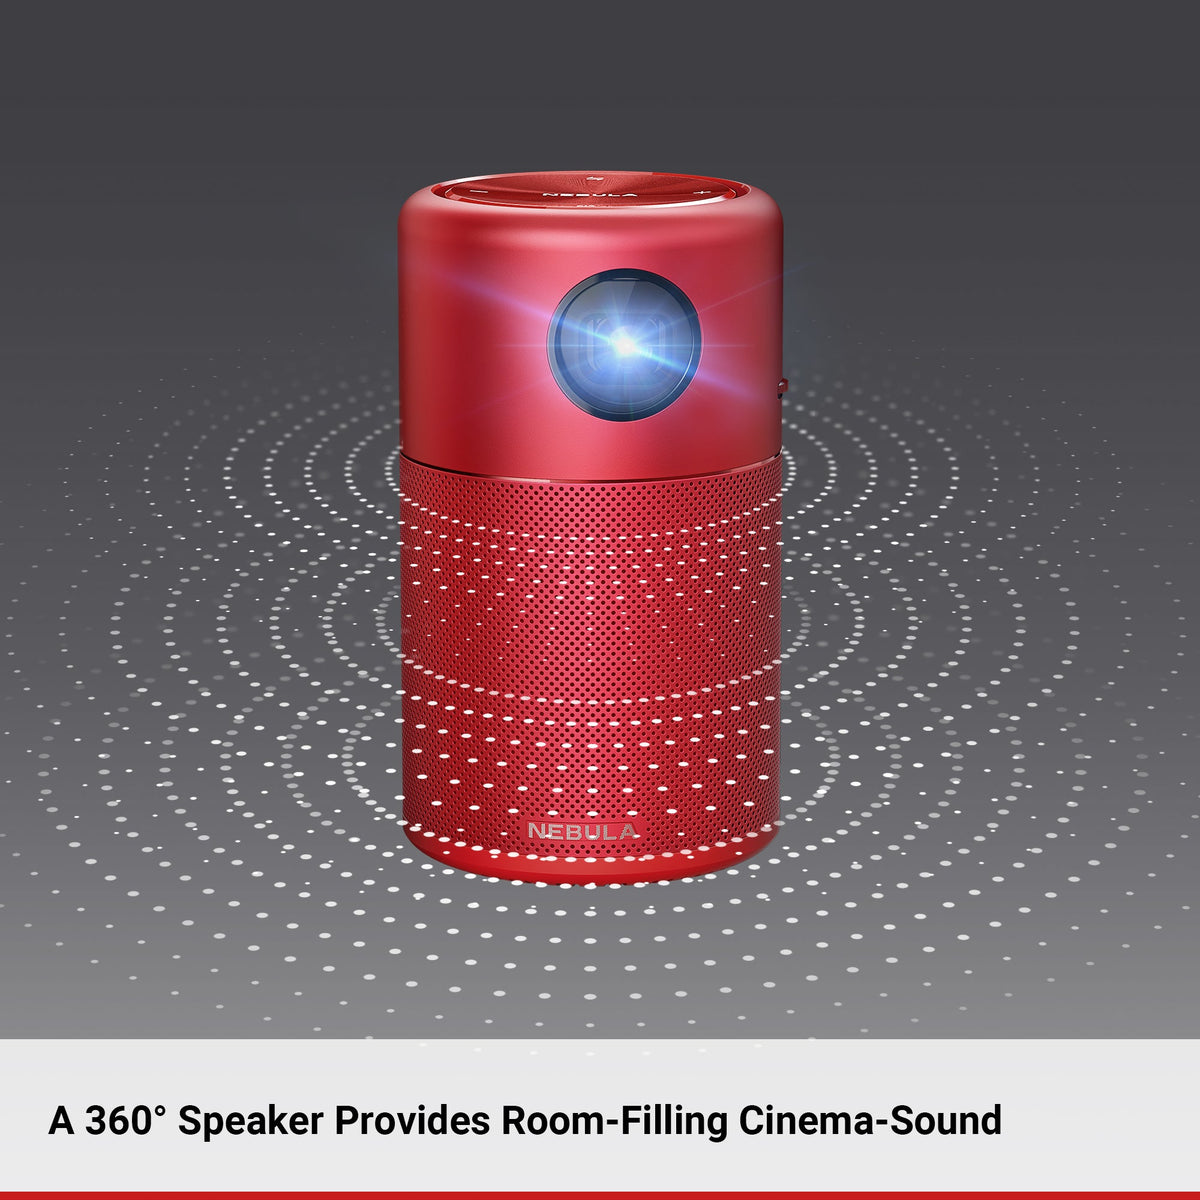 A red Nebula Capsule portable projector sits in a gray room with white, speckled swirls emanating sound.